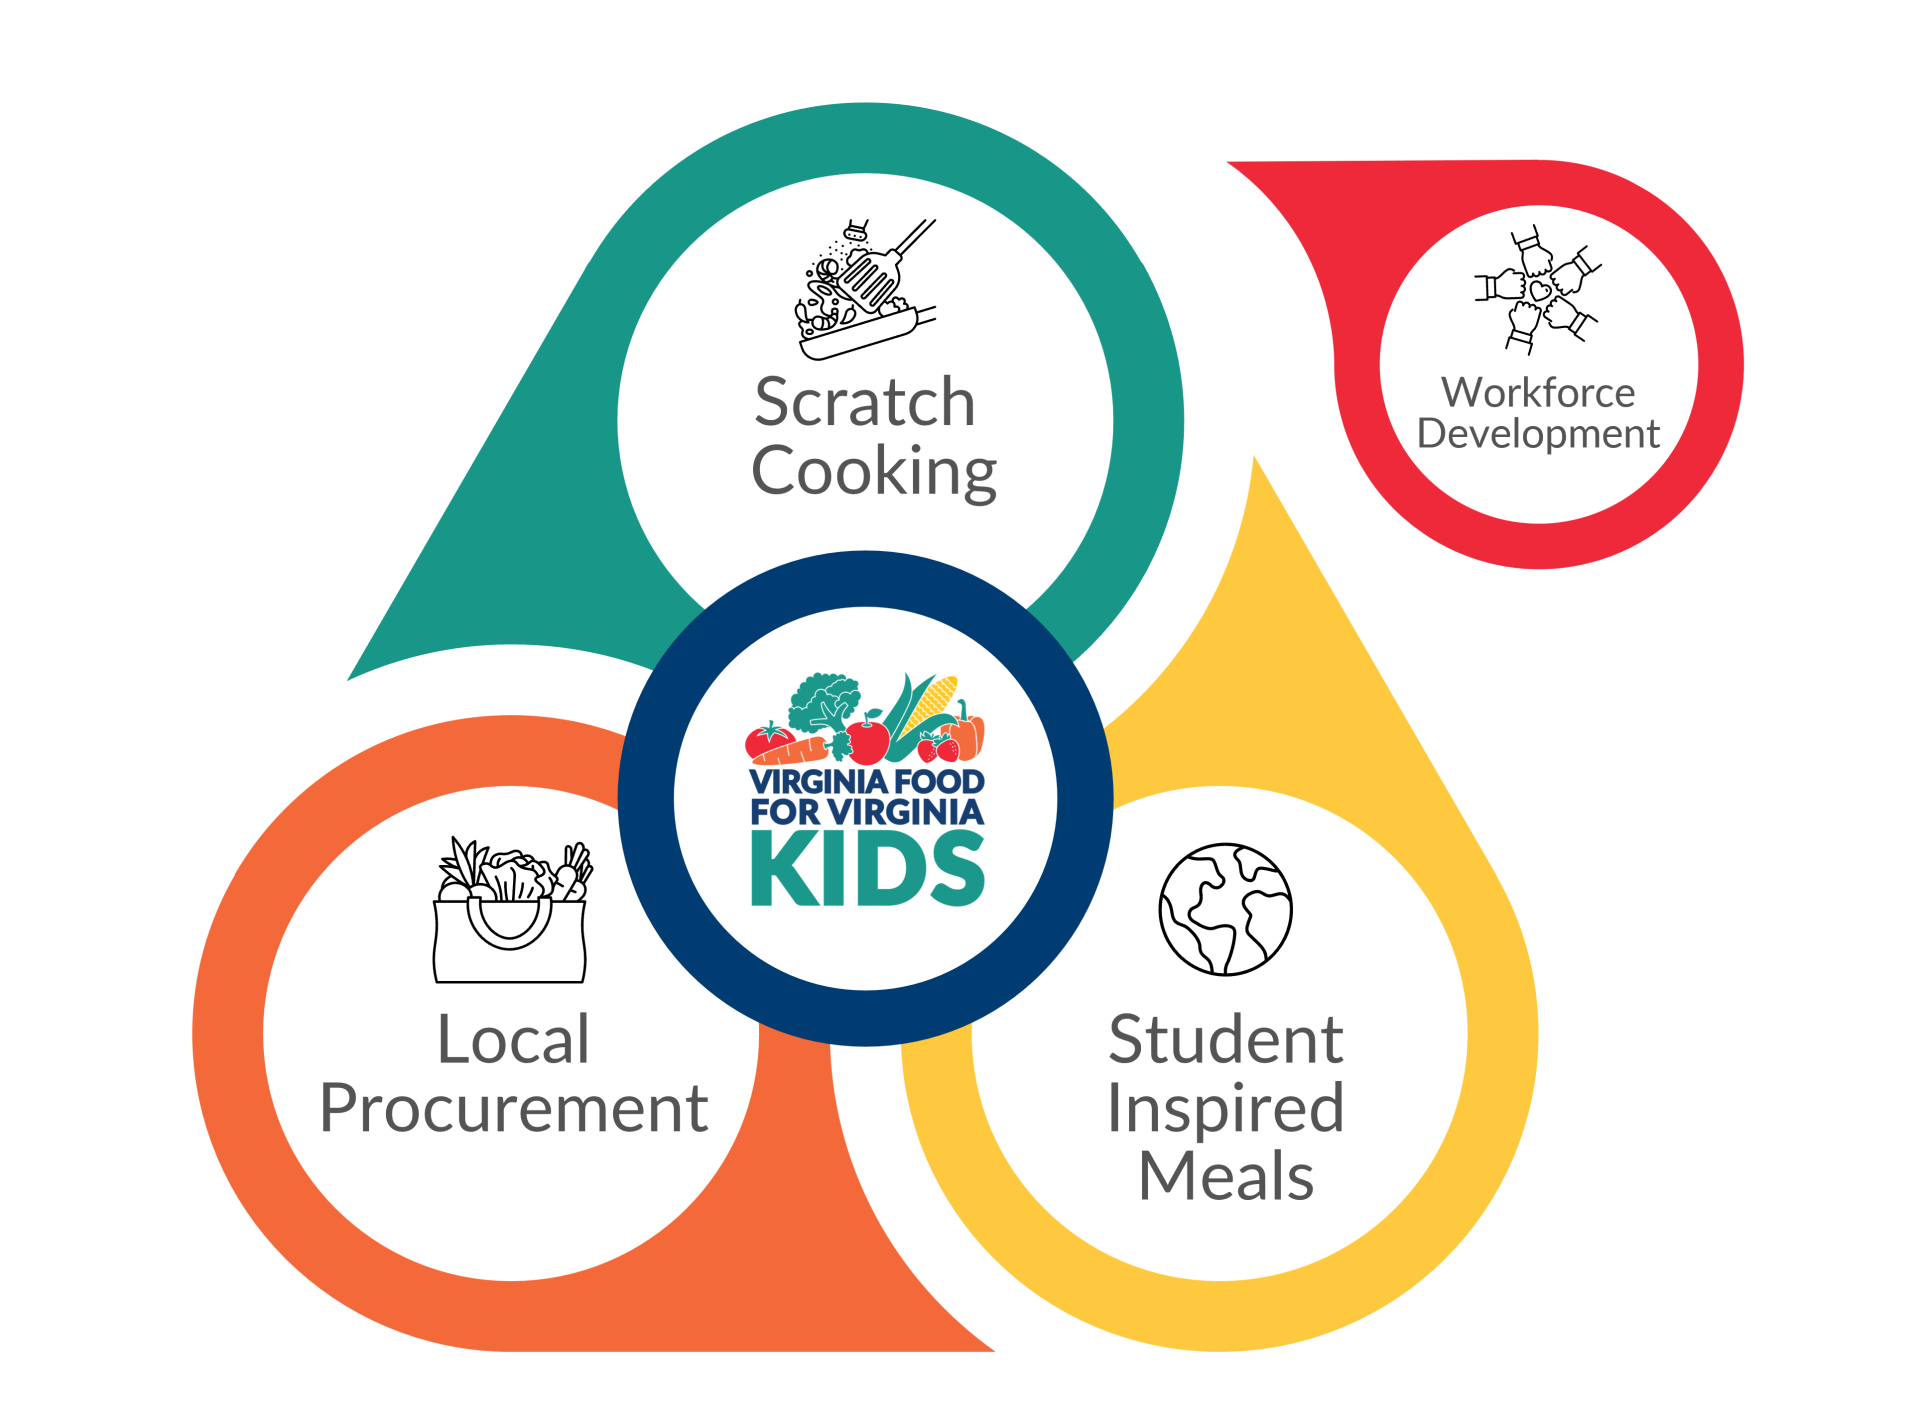 Elements of Virginia Food for Virginia Kids: Scratch Cooking, Local Procurement, Student Inspired Meals, and Workforce Development